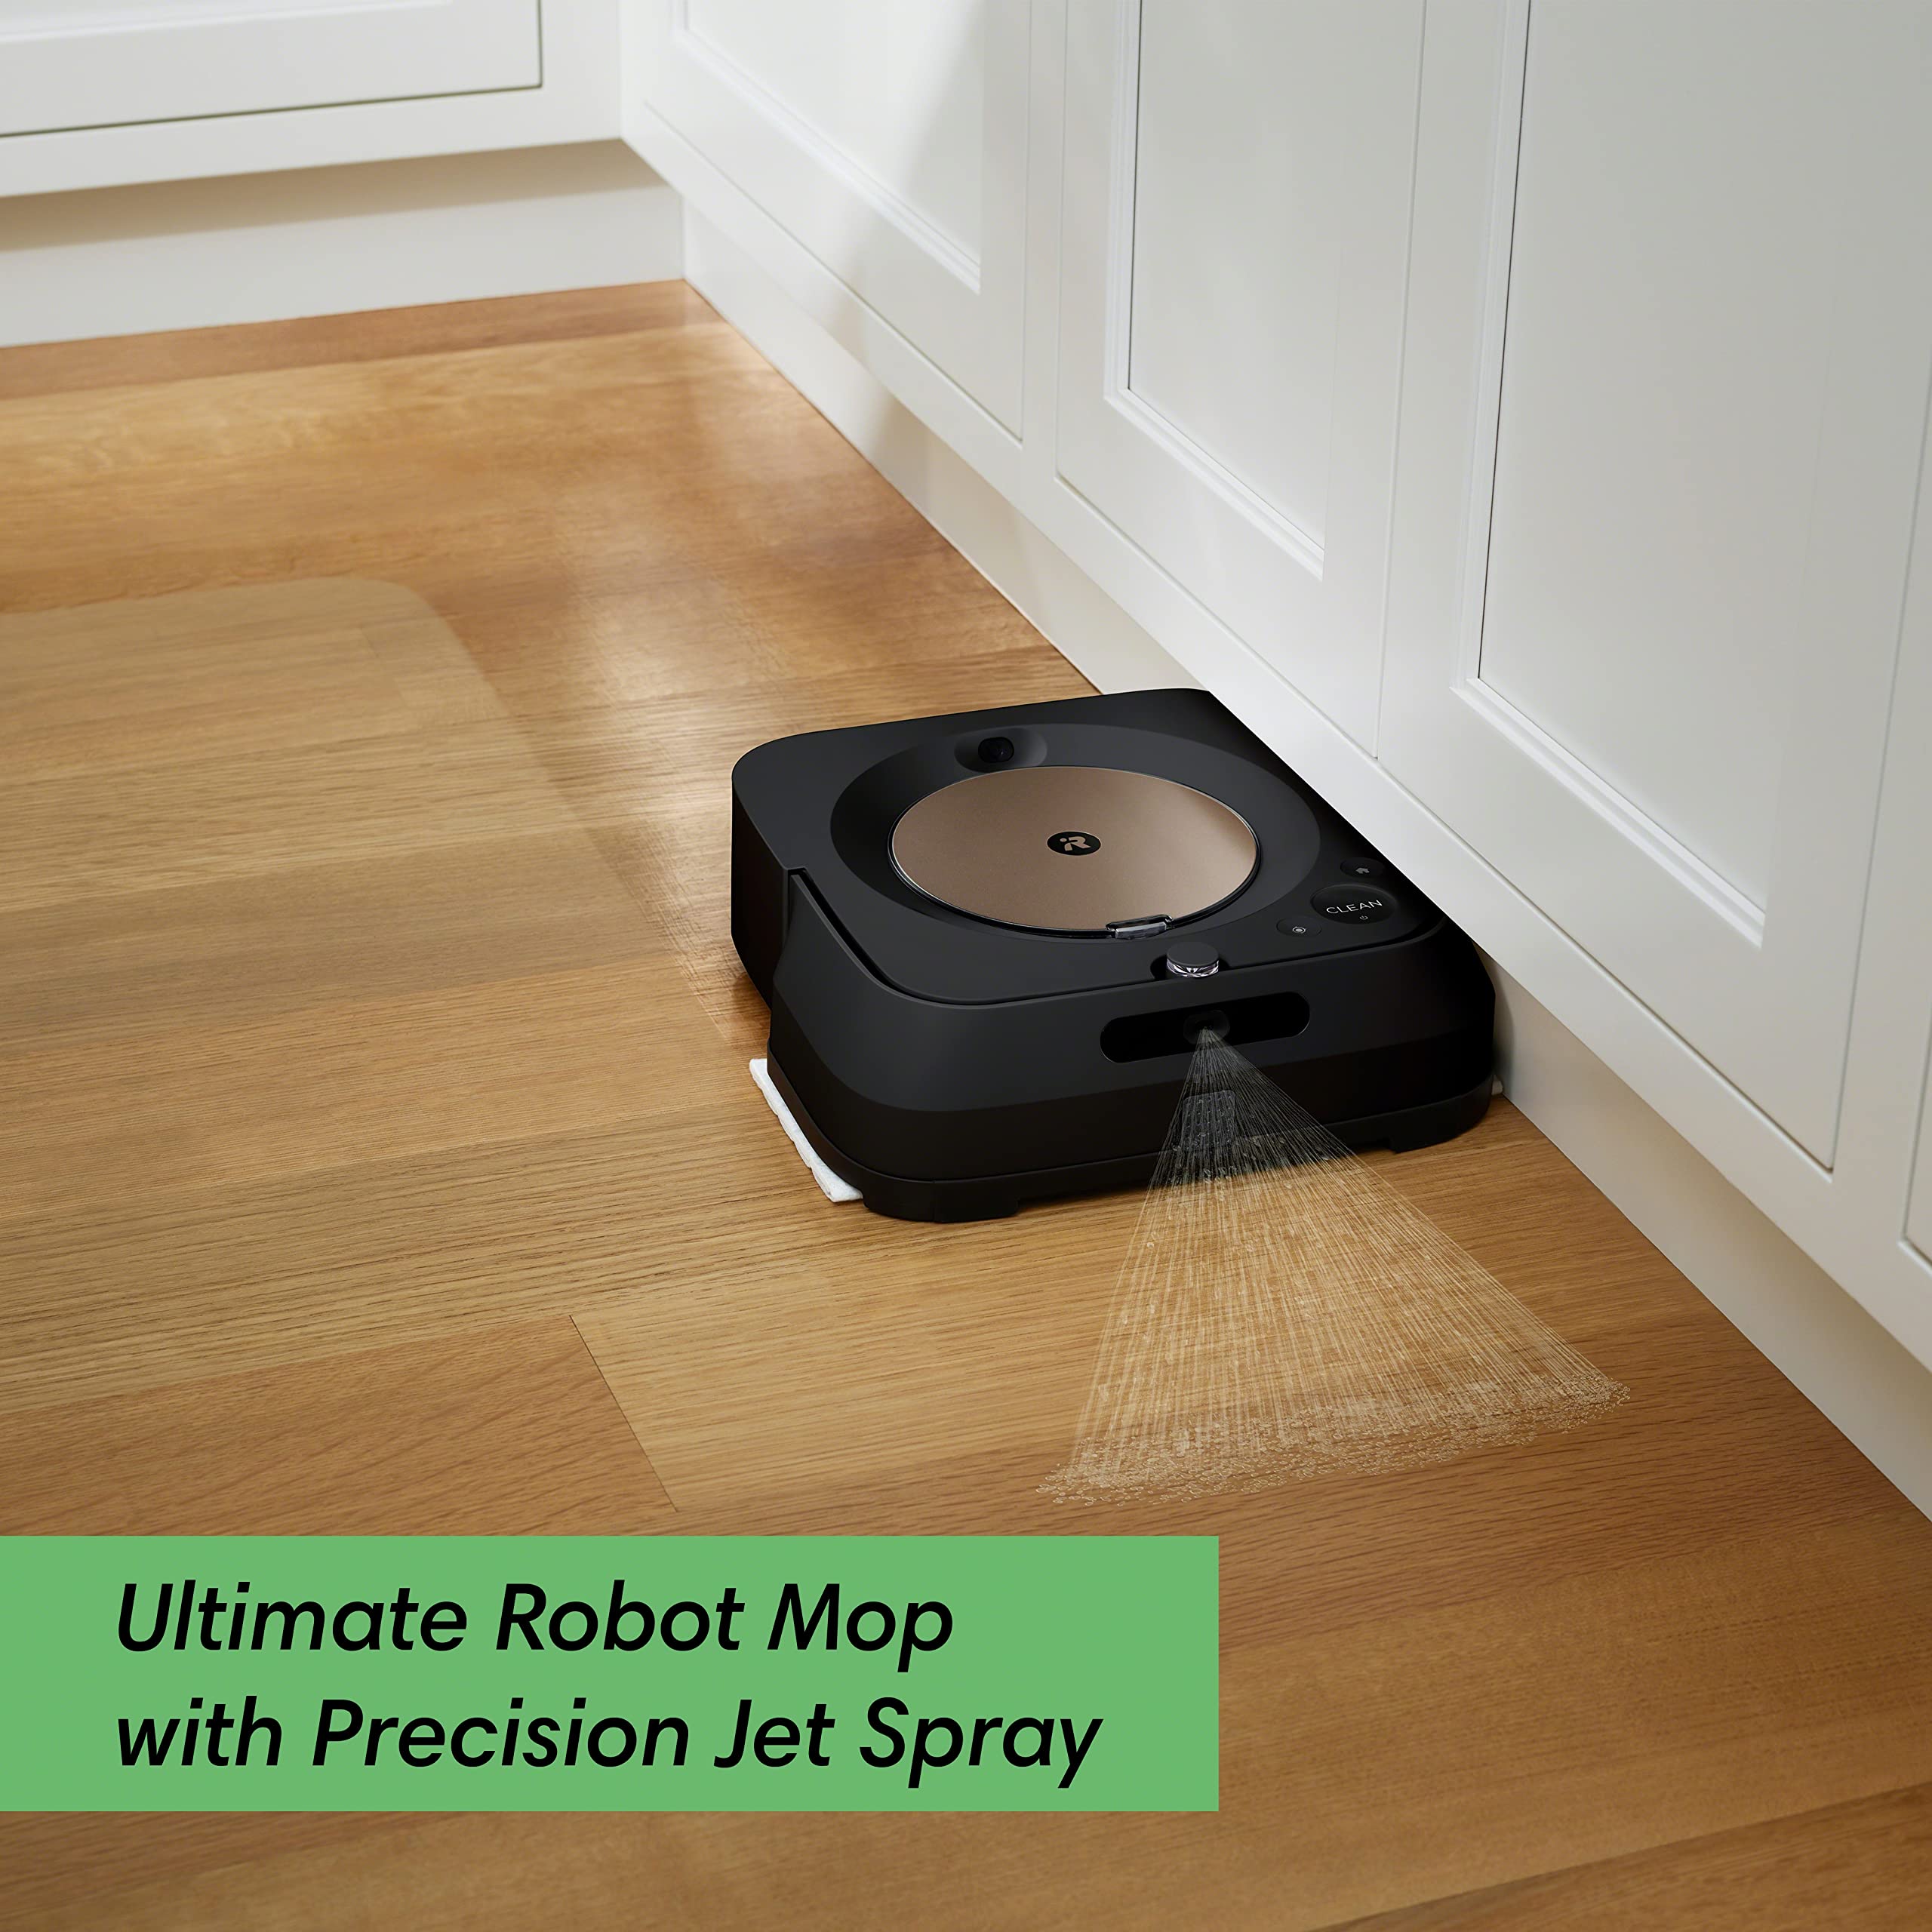 iRobot Braava Jet m6 (6012) Ultimate Robot Mop- Wi-Fi Connected, Precision Jet Spray, Smart Mapping, Works with Alexa, Ideal for Multiple Rooms, Recharges and Resumes, Black